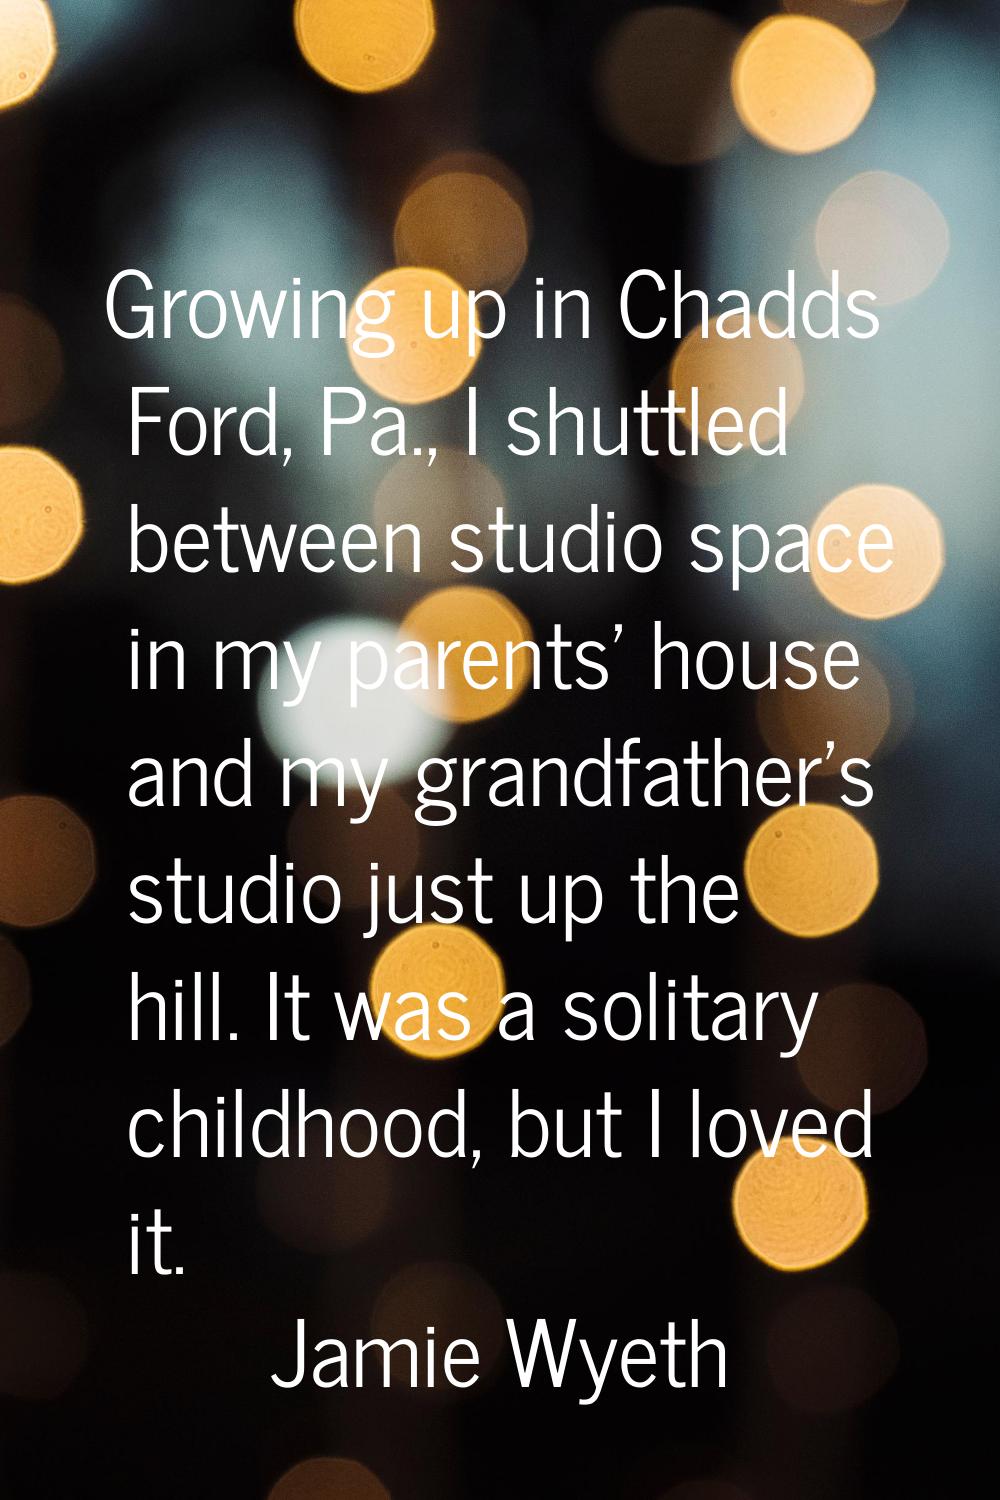 Growing up in Chadds Ford, Pa., I shuttled between studio space in my parents' house and my grandfa